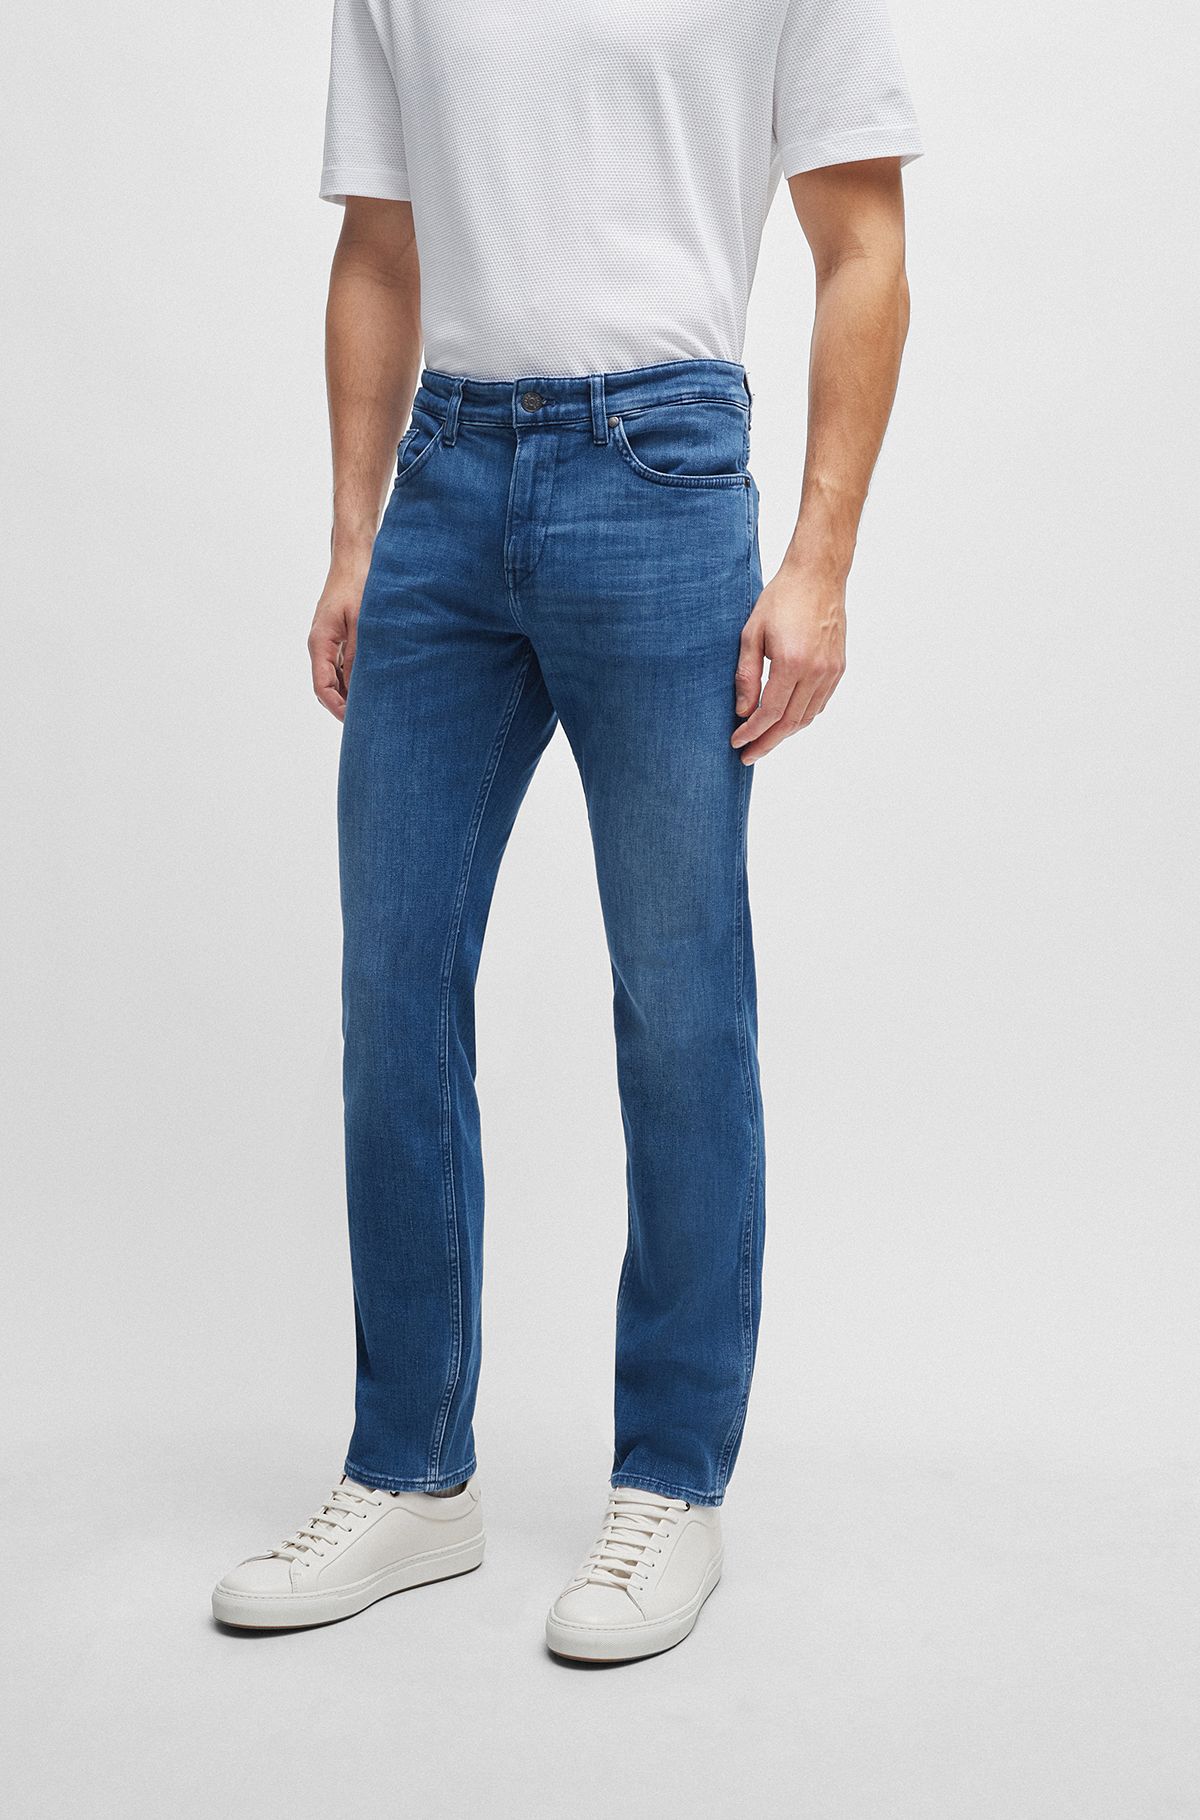 BOSS - Slim-fit jeans in blue Italian cashmere-touch denim | Stretchjeans